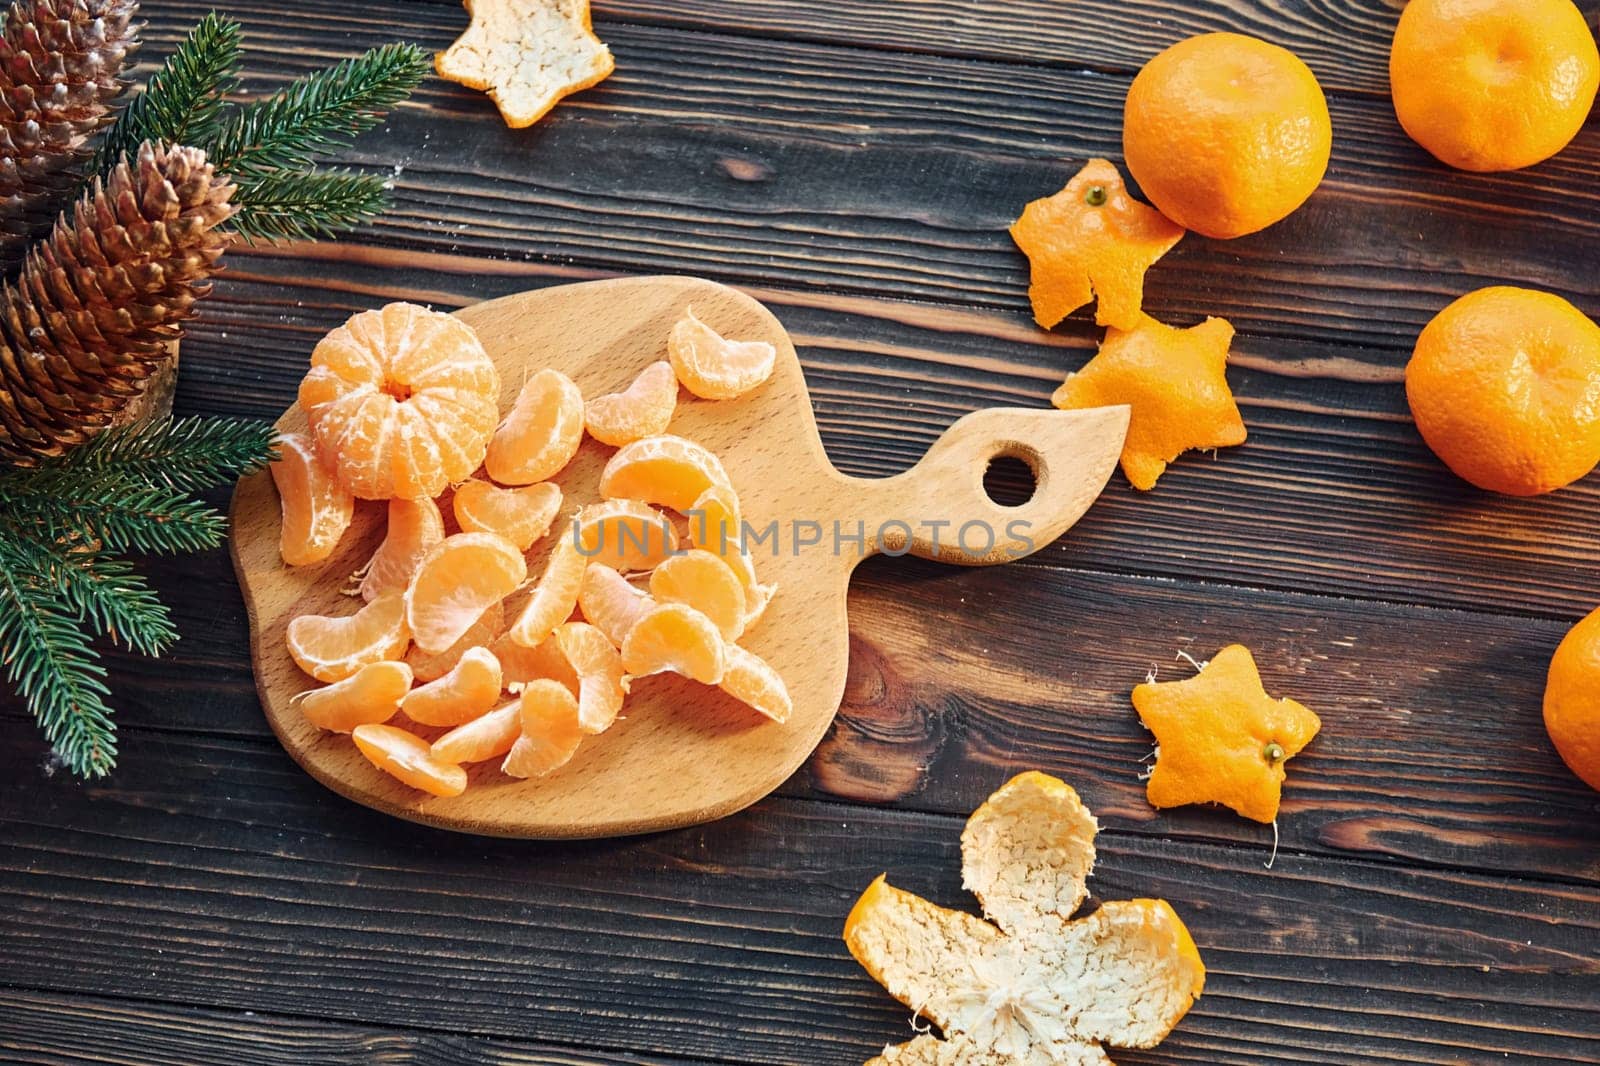 Fruits is on the table. Christmas background with holiday decoration.